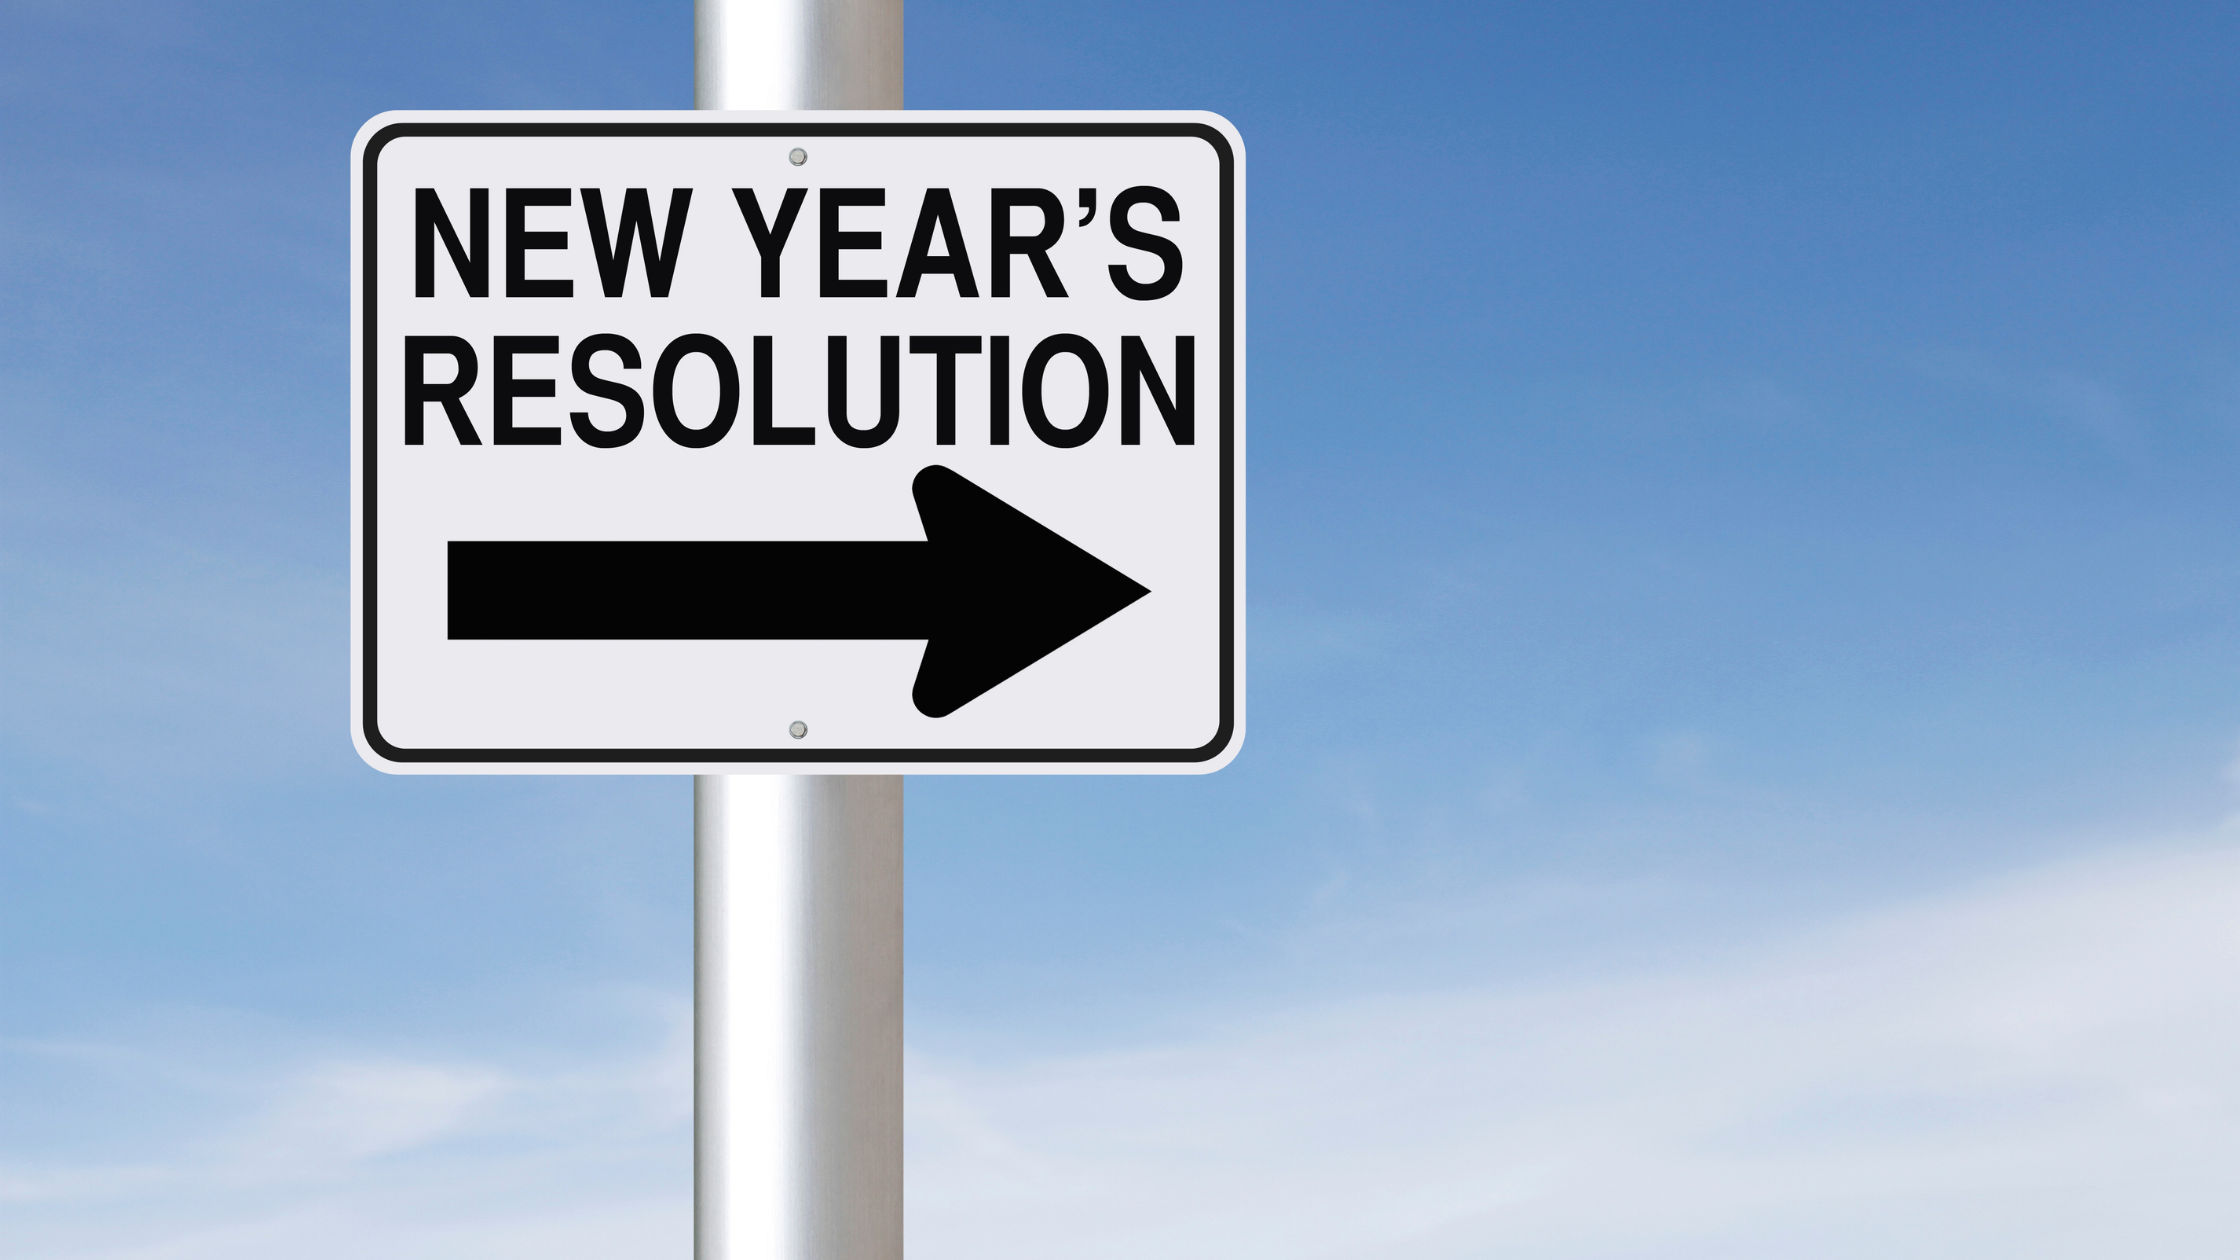 NEW YEAR'S RESOLUTIONS iDEAS